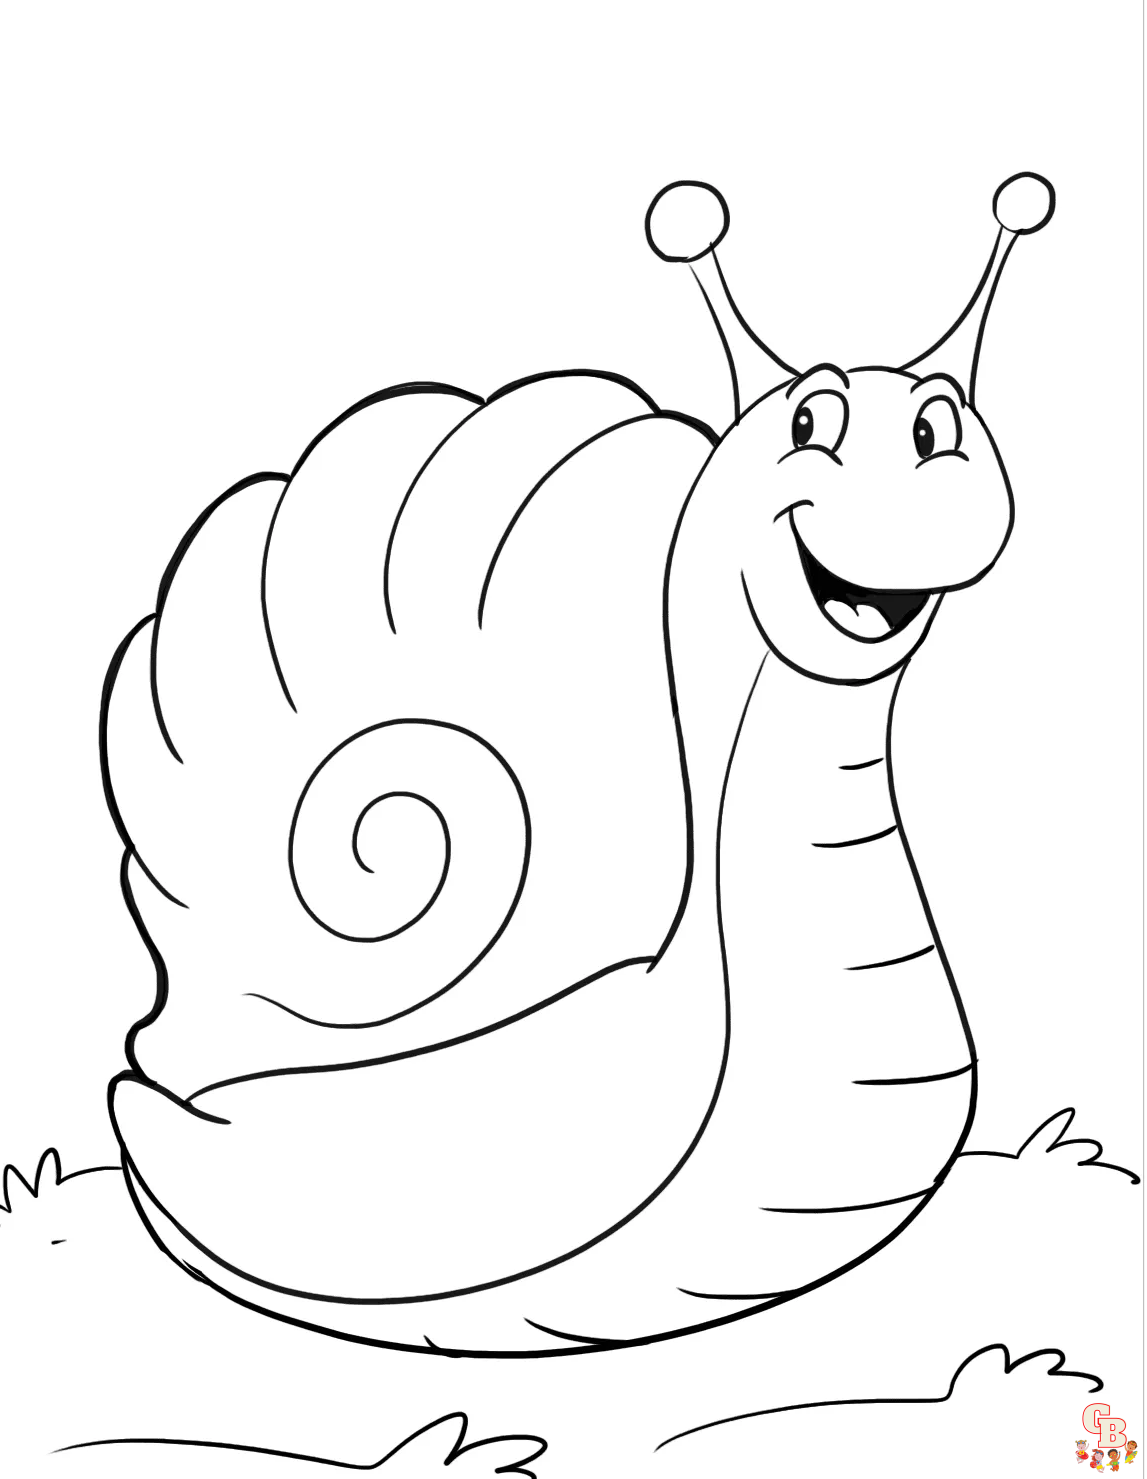 Snail Coloring Pages